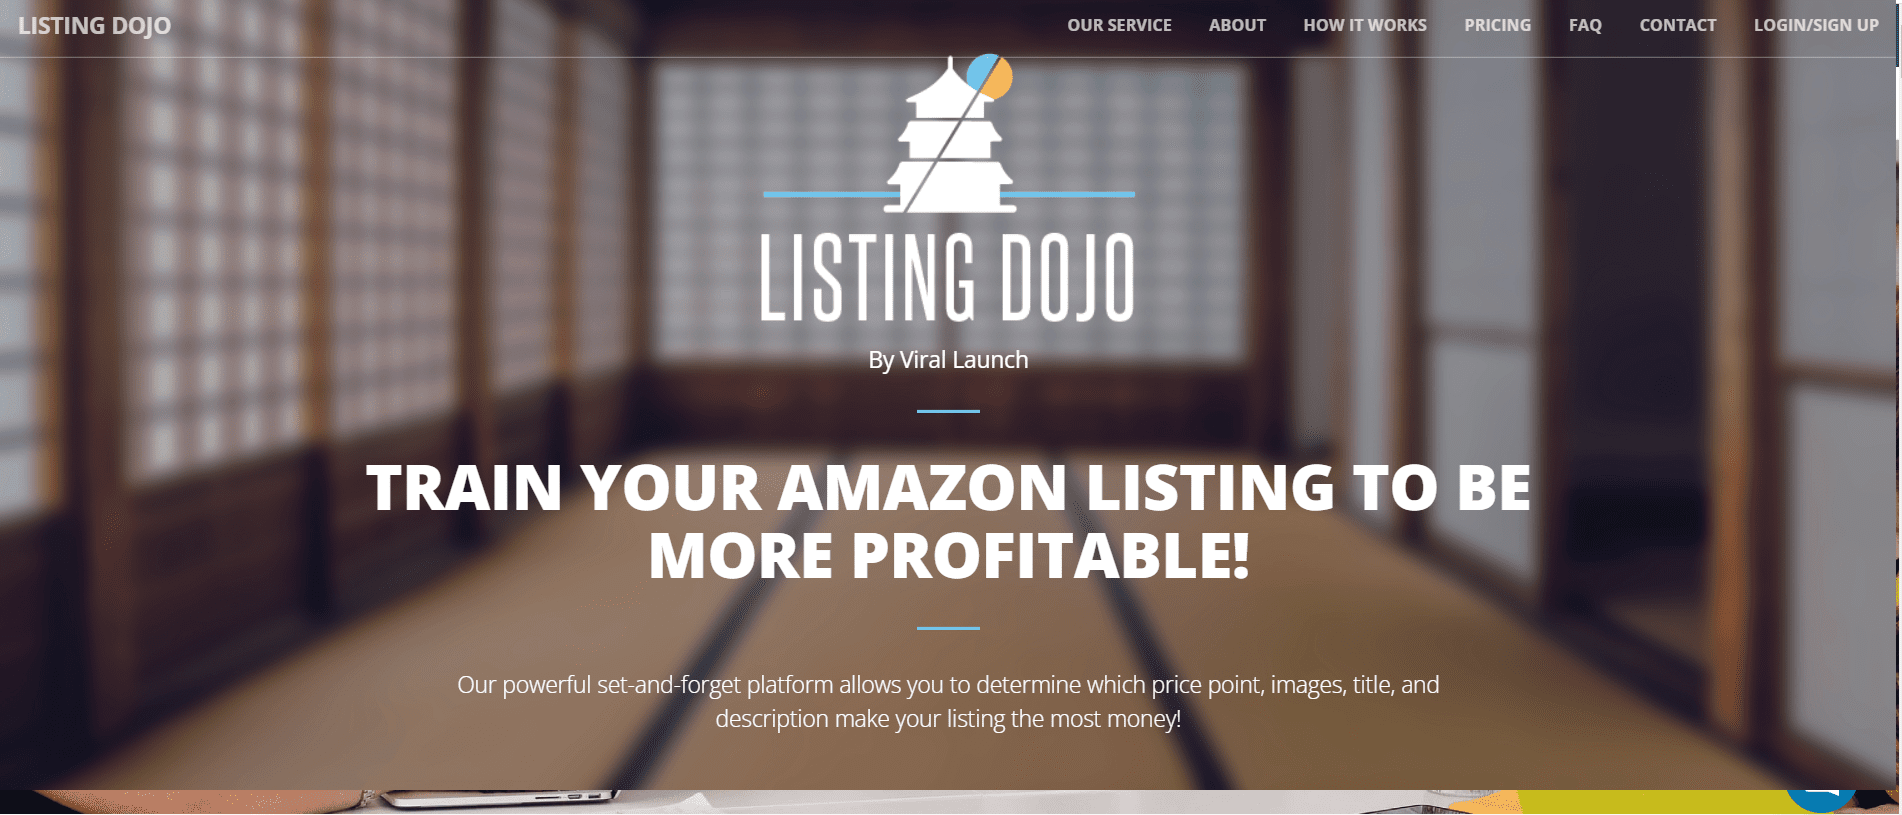 Amazon A/B Testing Software- listing dojo overview 